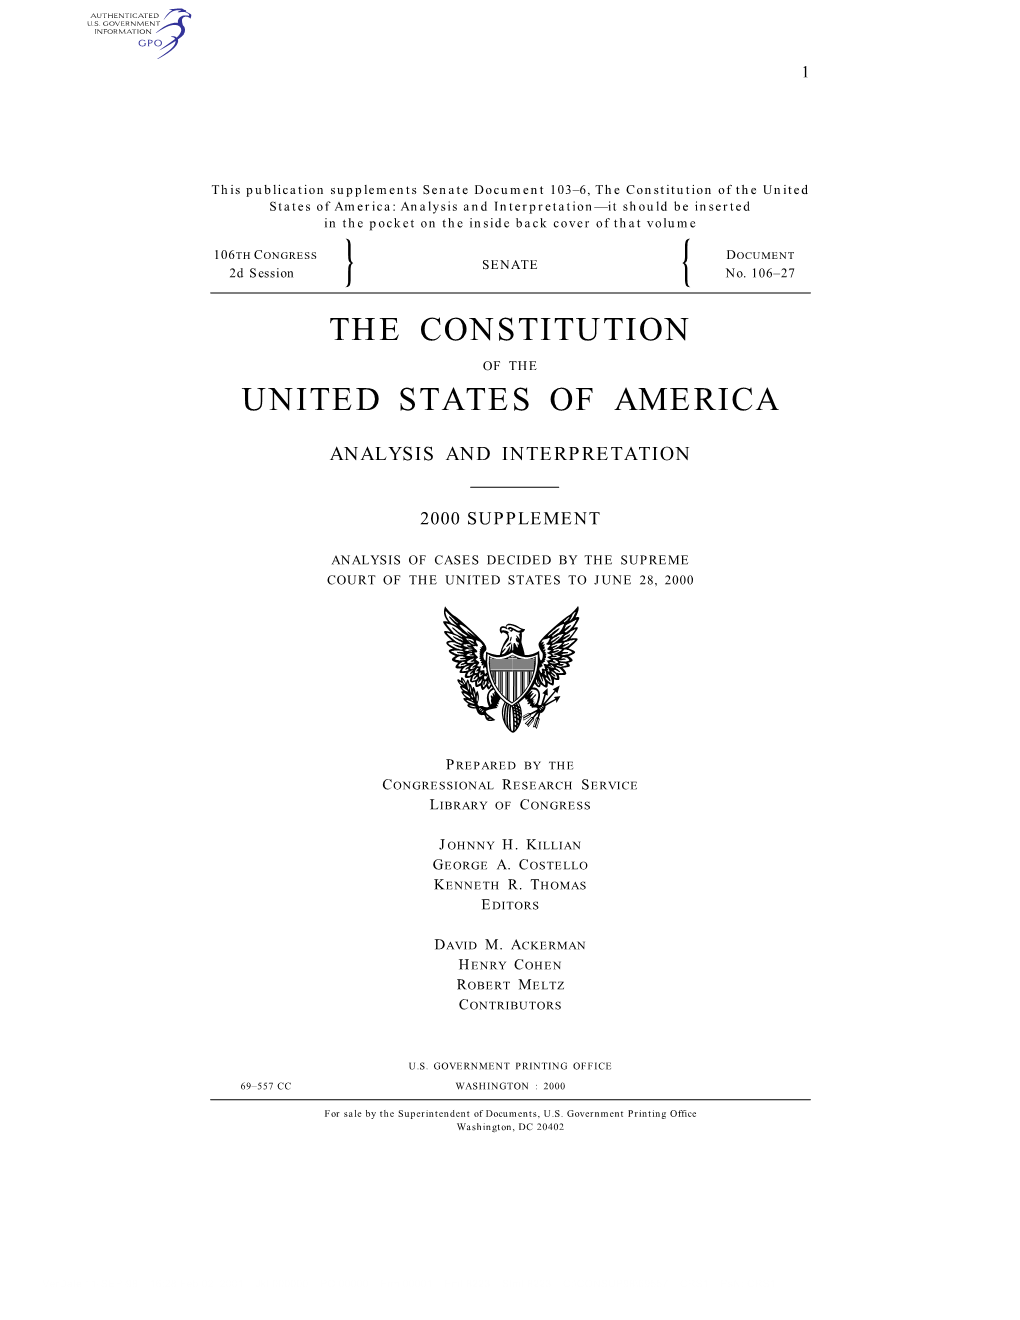 The Constitution United States of America